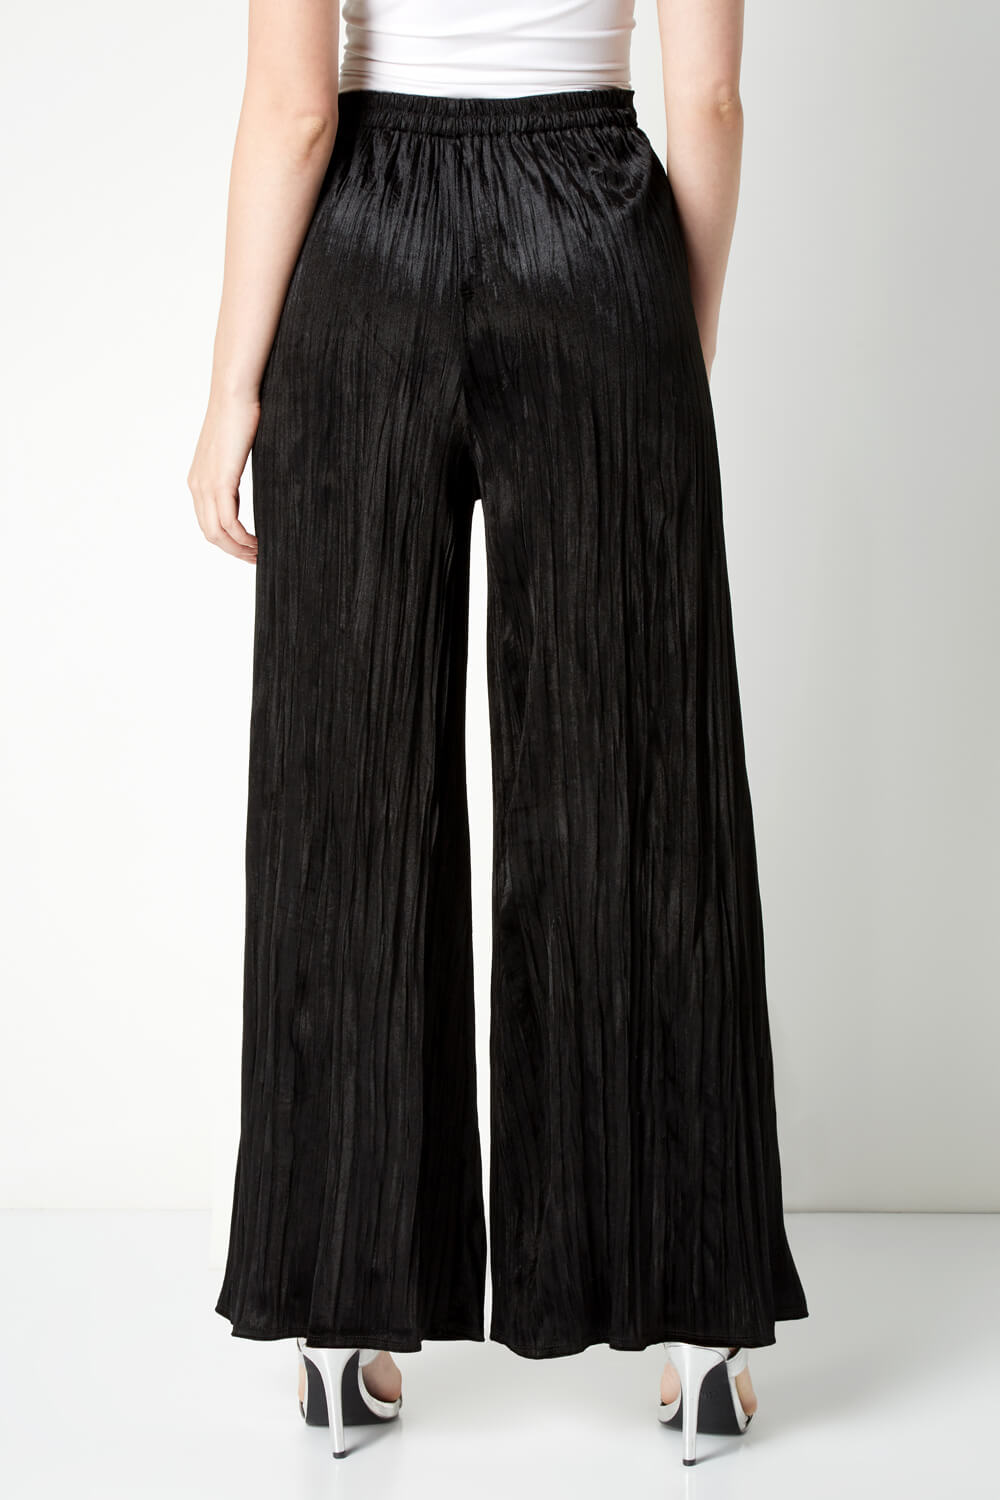 Black Crushed Velour Palazzo Trousers, Image 2 of 4